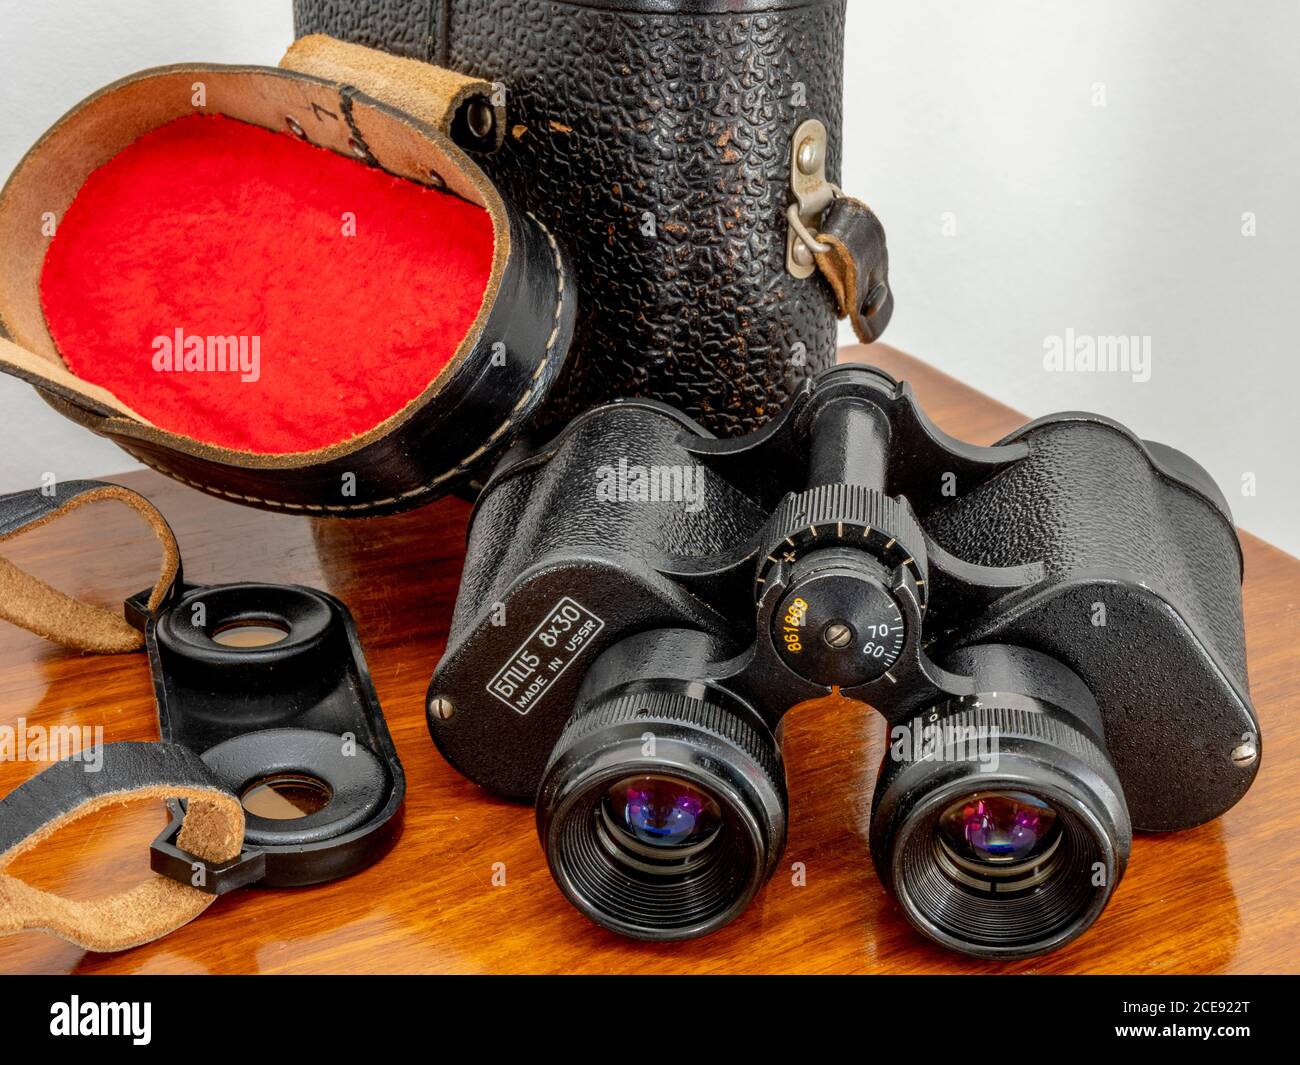 Vintage Russian binoculars, metal construction, etched with БПЦ5 8x30 MADE  IN USSR. Pair of light / sun eyepiece filters and leather case are nearby  Stock Photo - Alamy